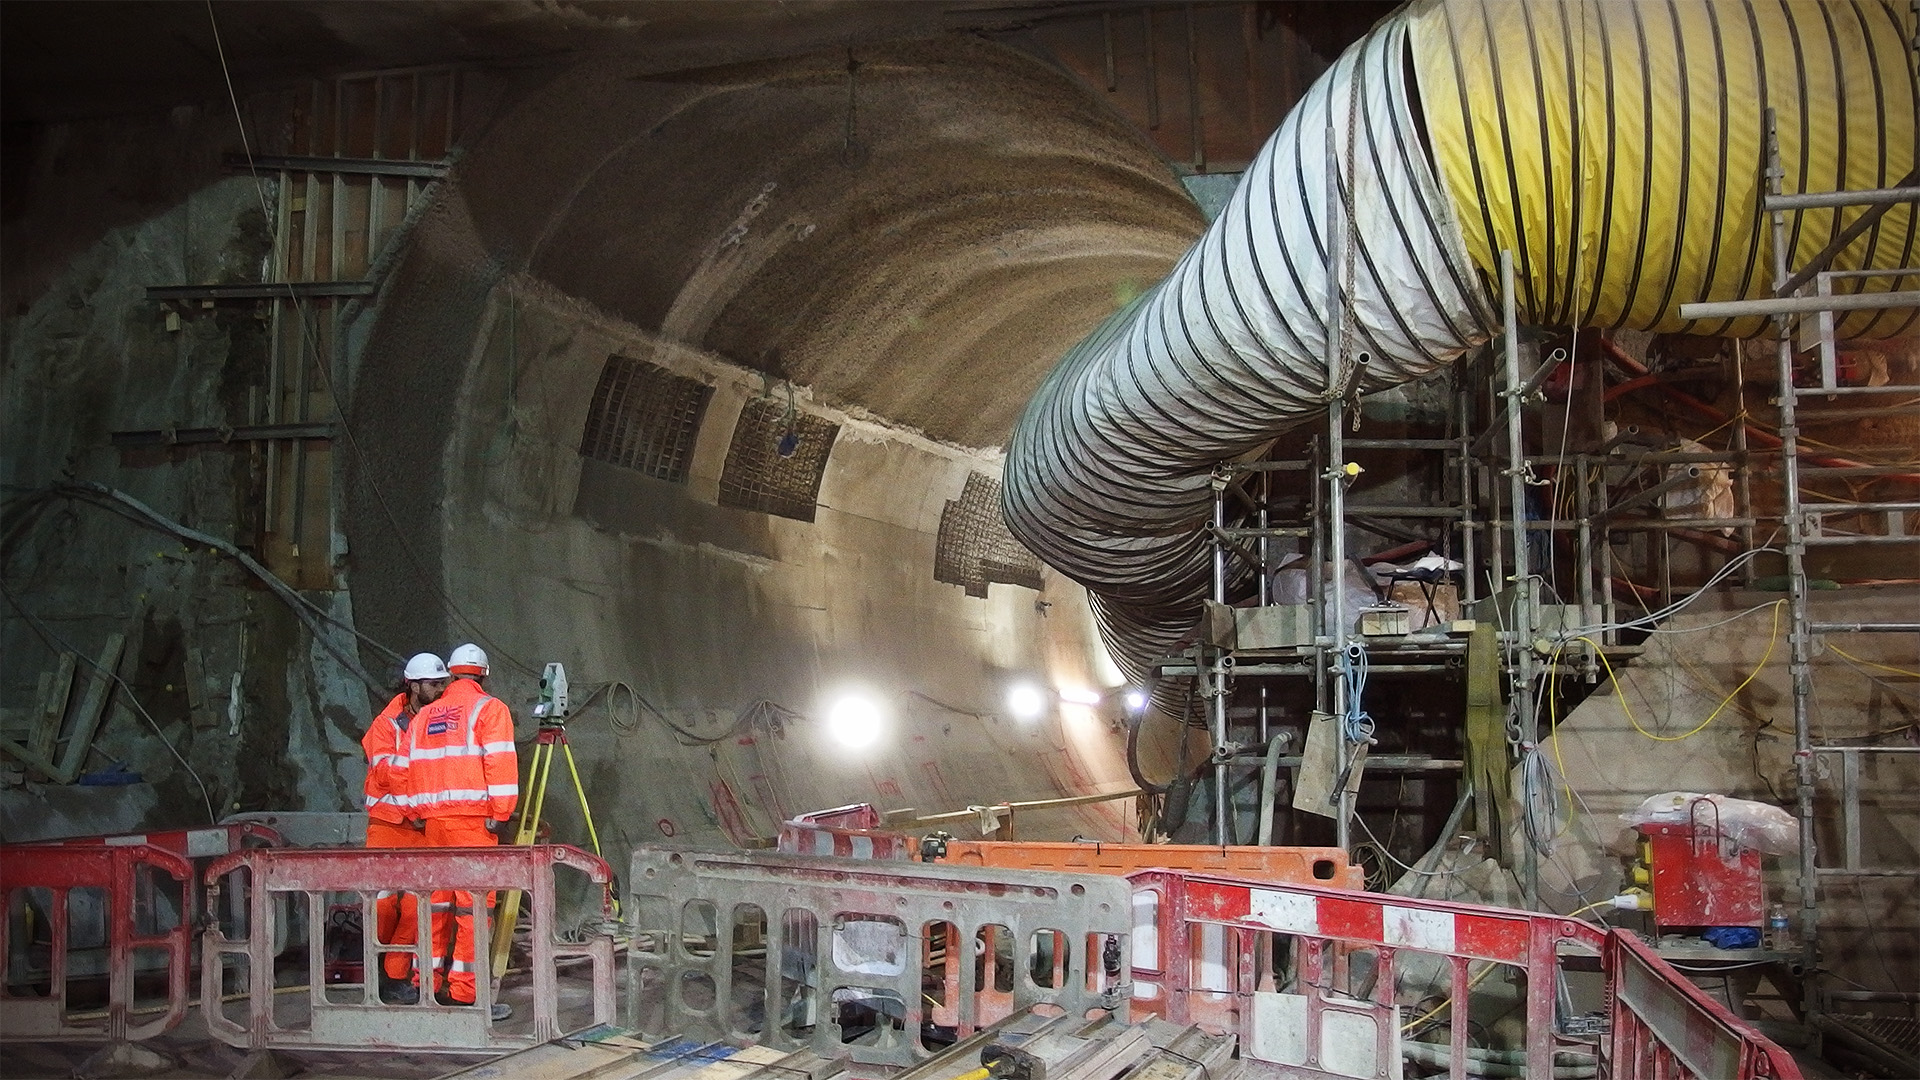 Ventilation tubes feed away from a tunnel, with surveyors working in the tunnel portal